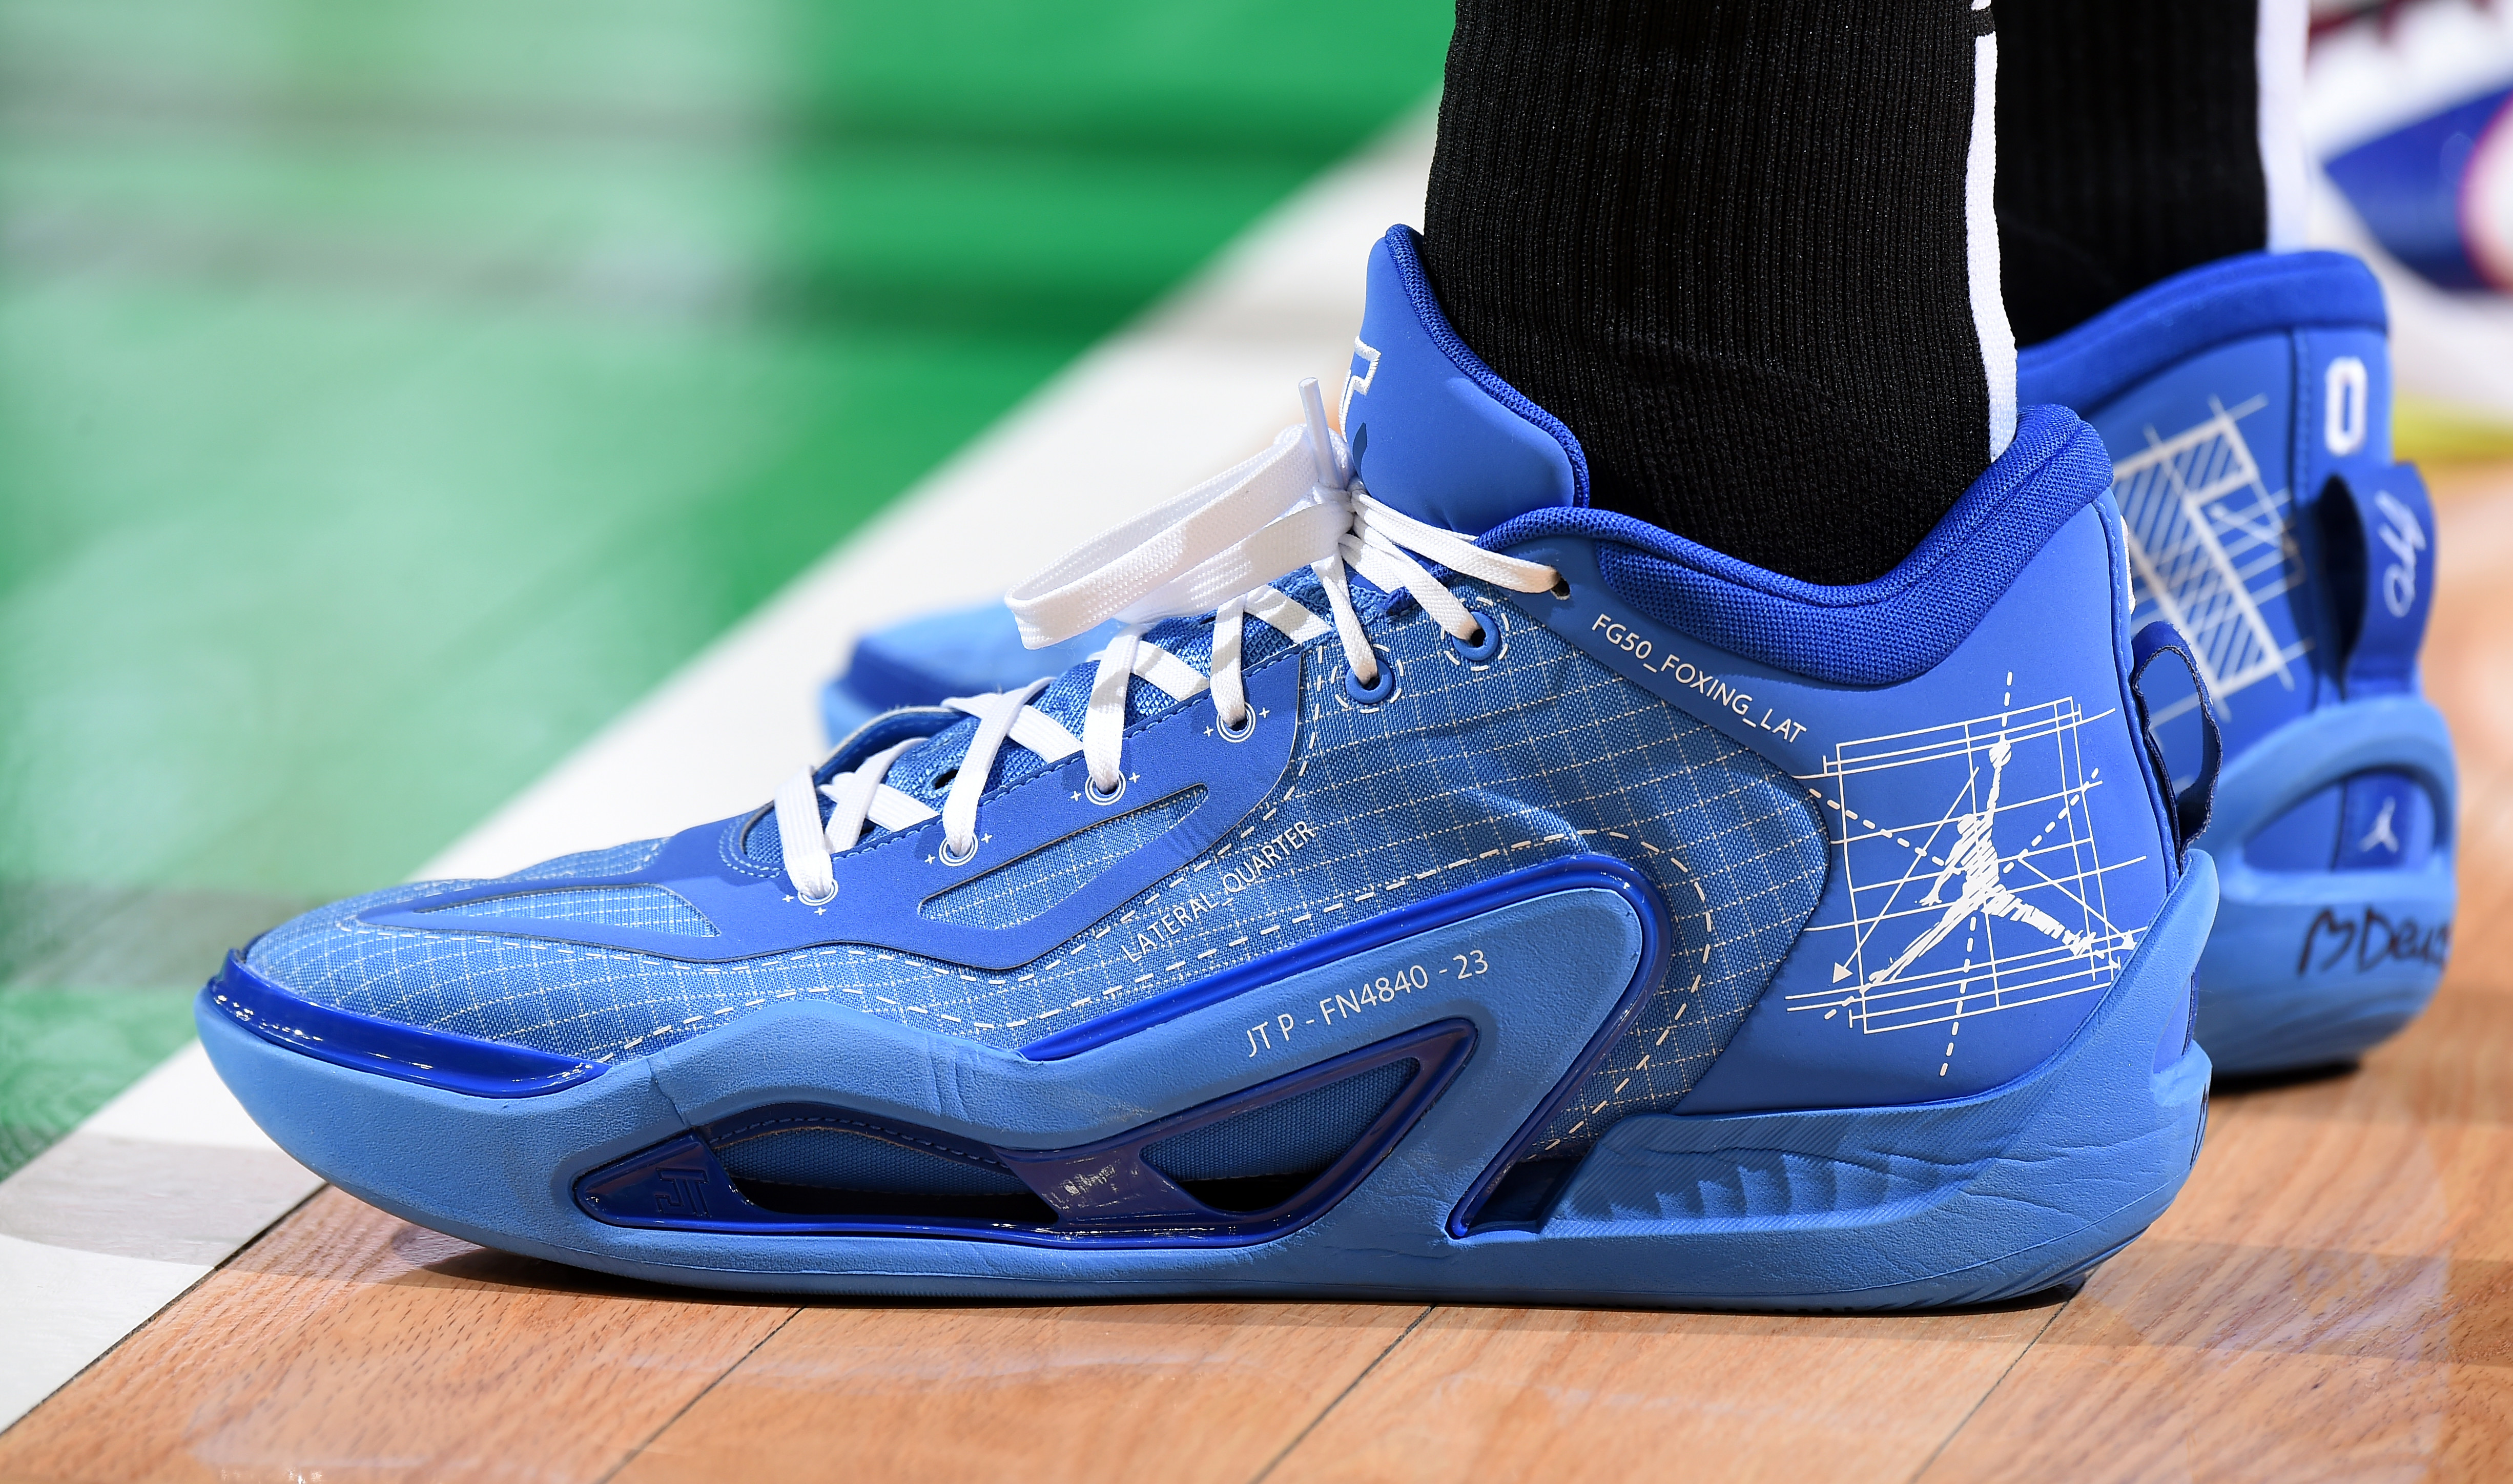 What NBA players have signature shoes?